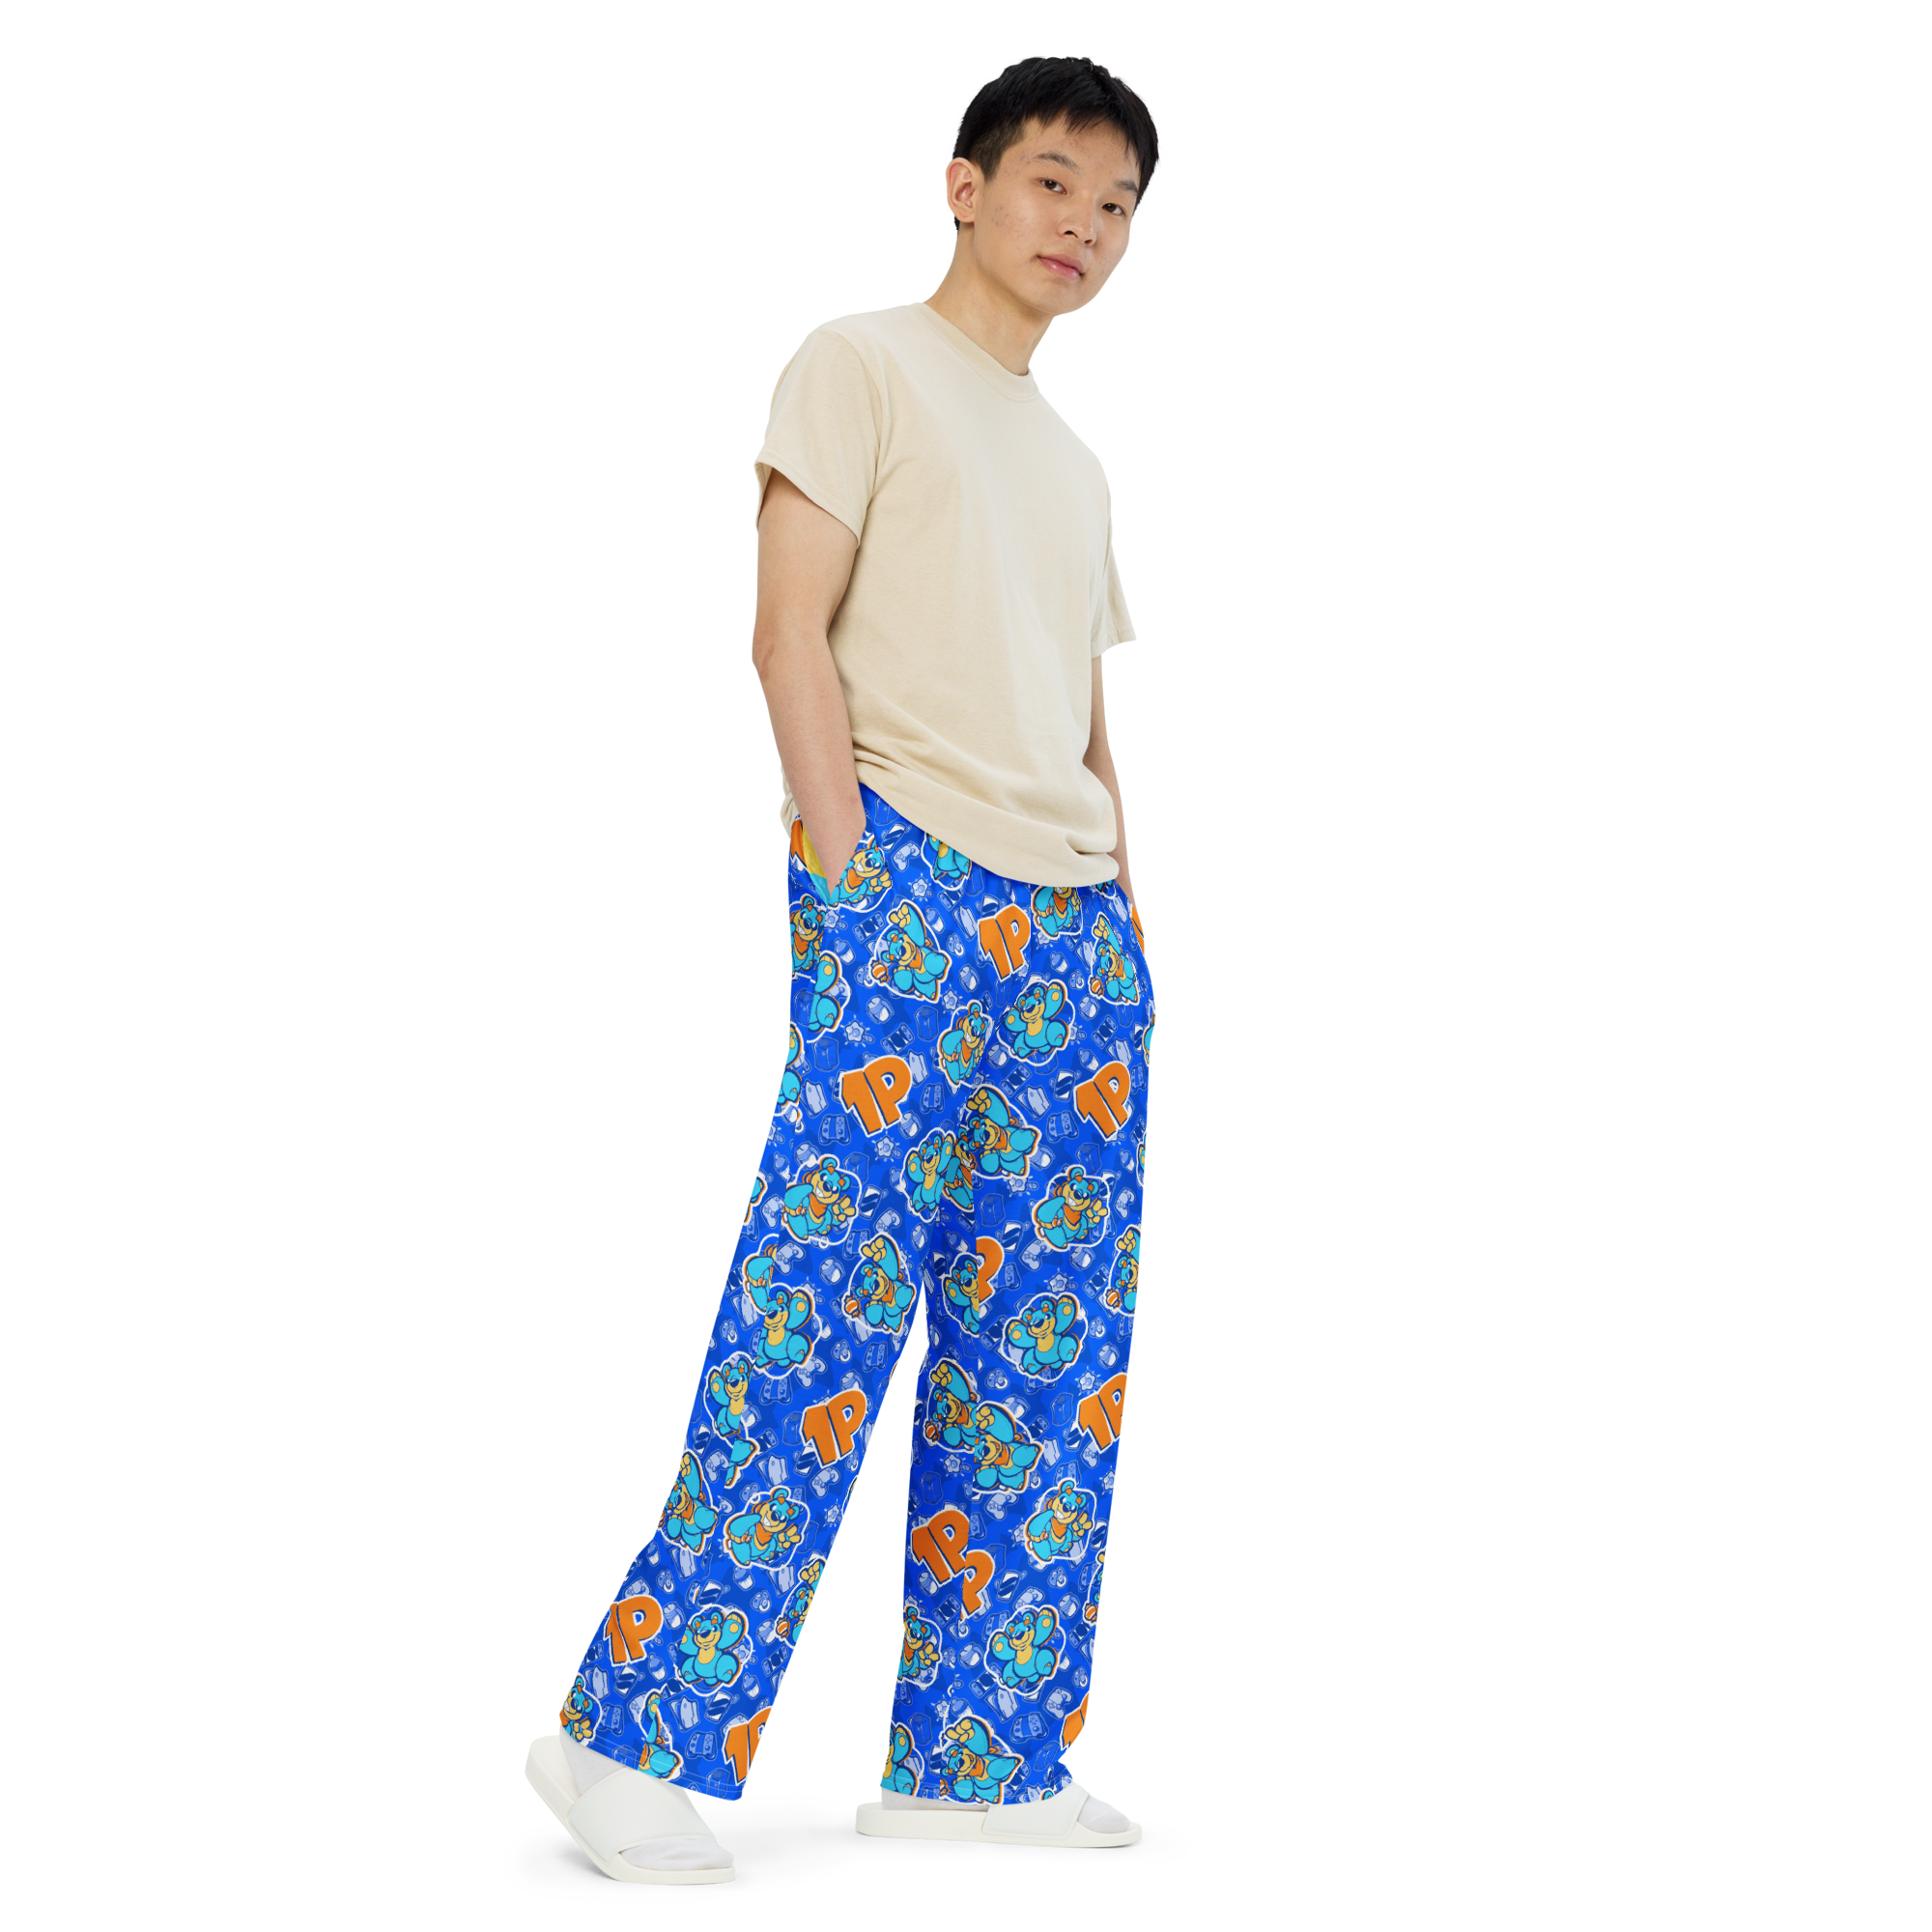 Relaxed Comfy Pants - #TeamBurr - Gaming Party 2